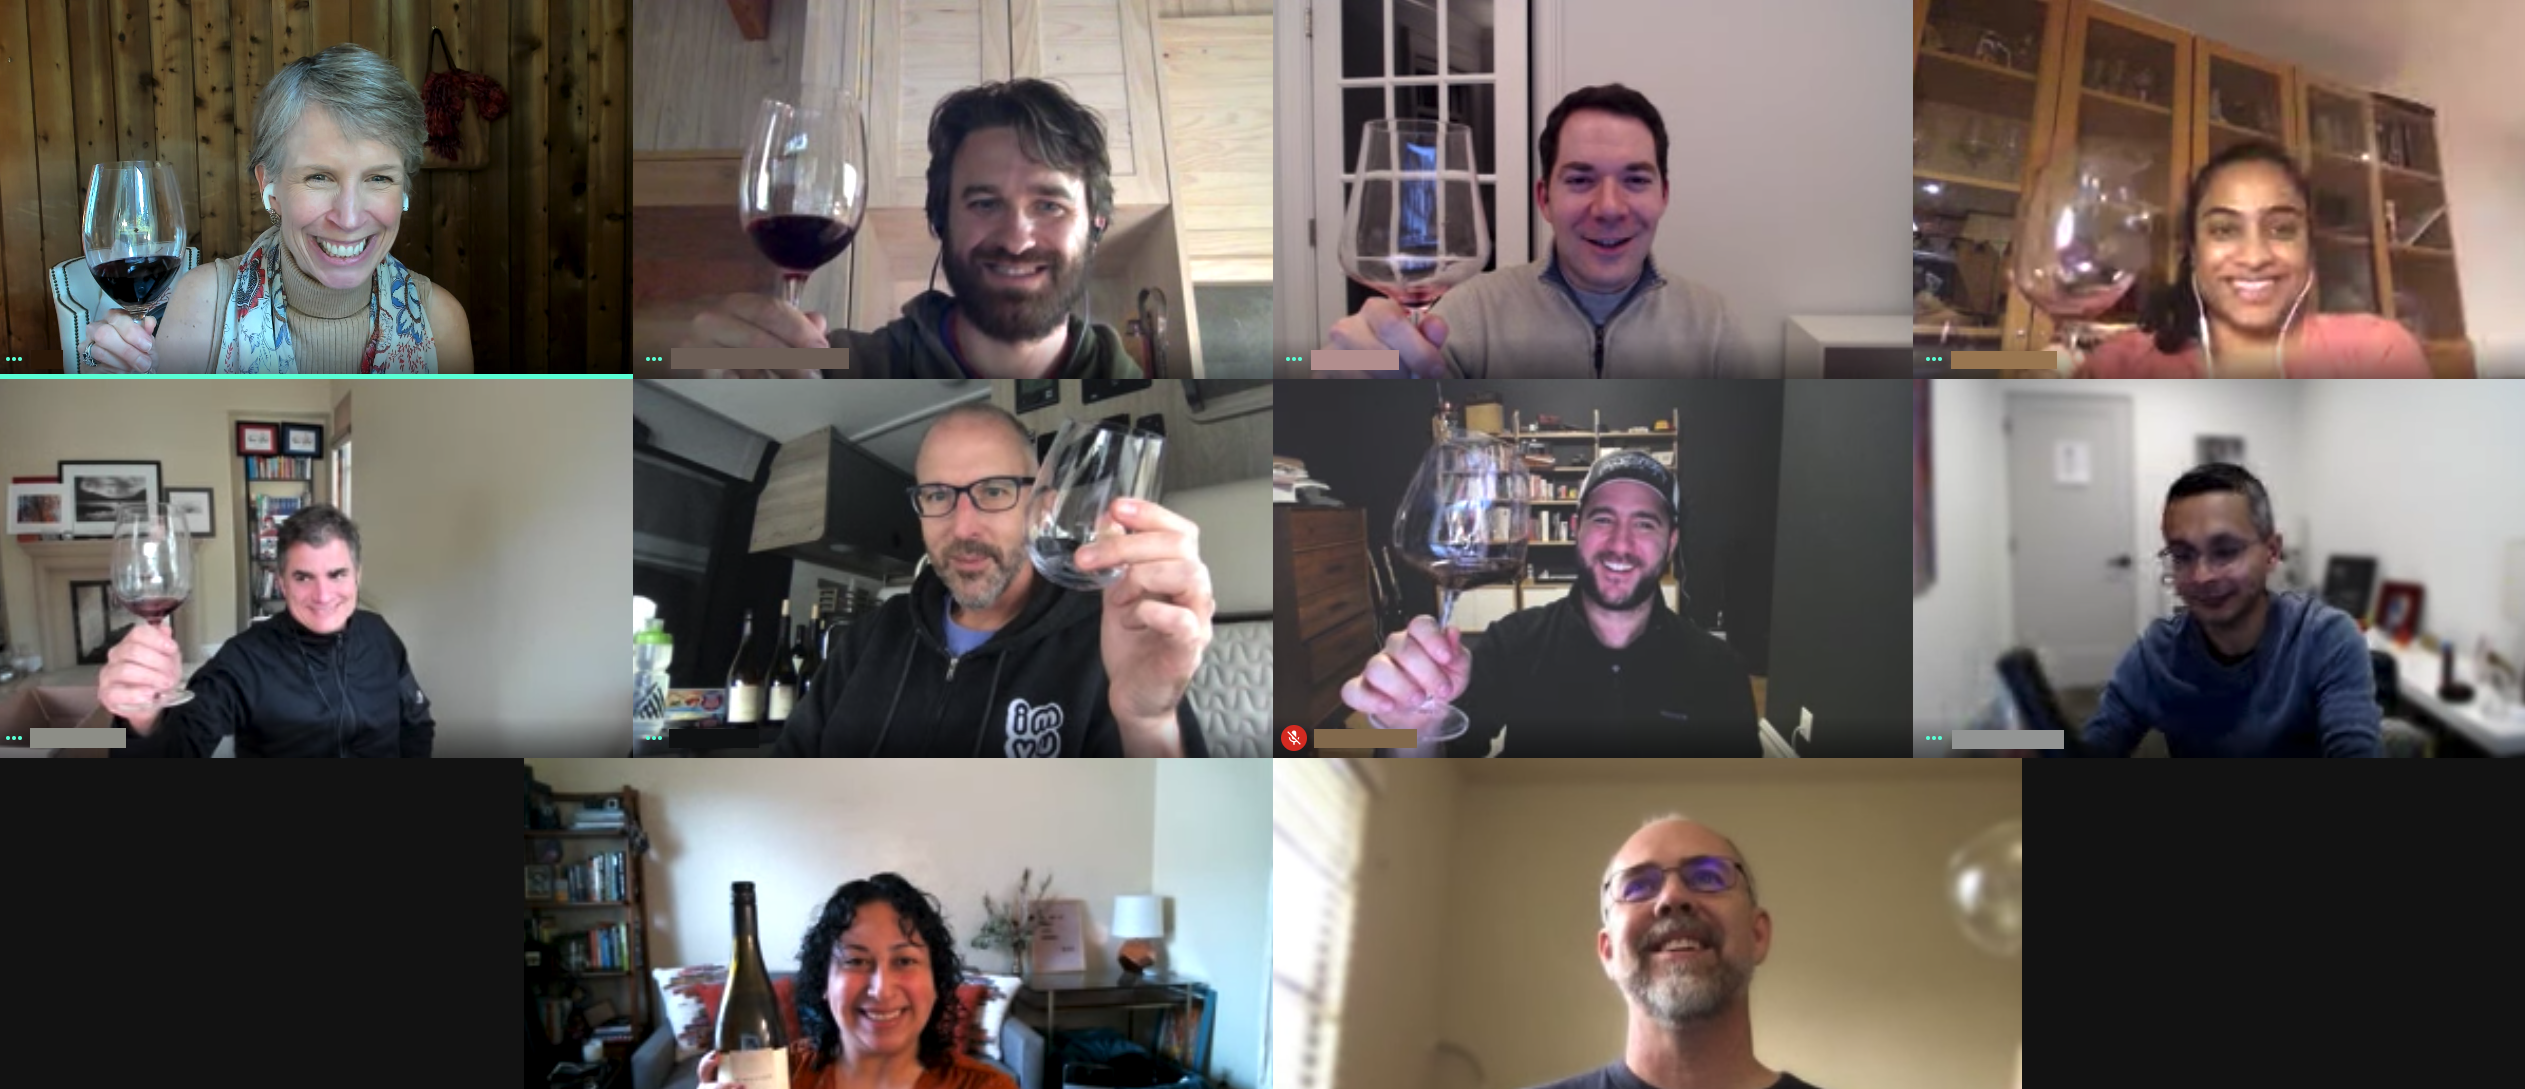 Screenshot capturing one of our virtual wine tastings with Courtney Kingston (top left) and winemaker Amael Orrego (to the right of Courtney).